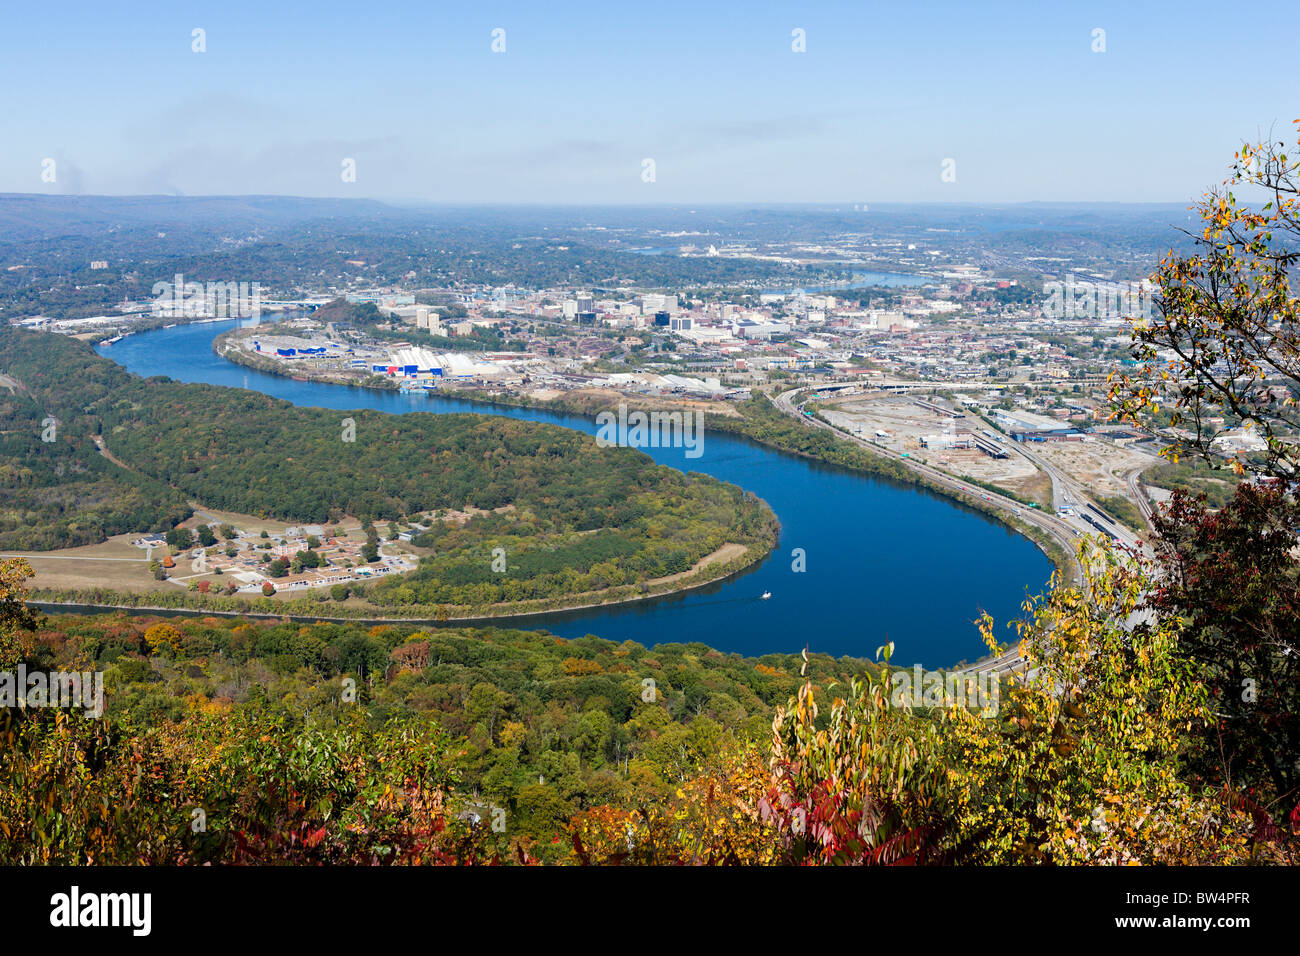 View towards Chattanooga and the Tennessee River from Point Park, Lookout Mountain, Chattanooga, Tennessee, USA Stock Photo